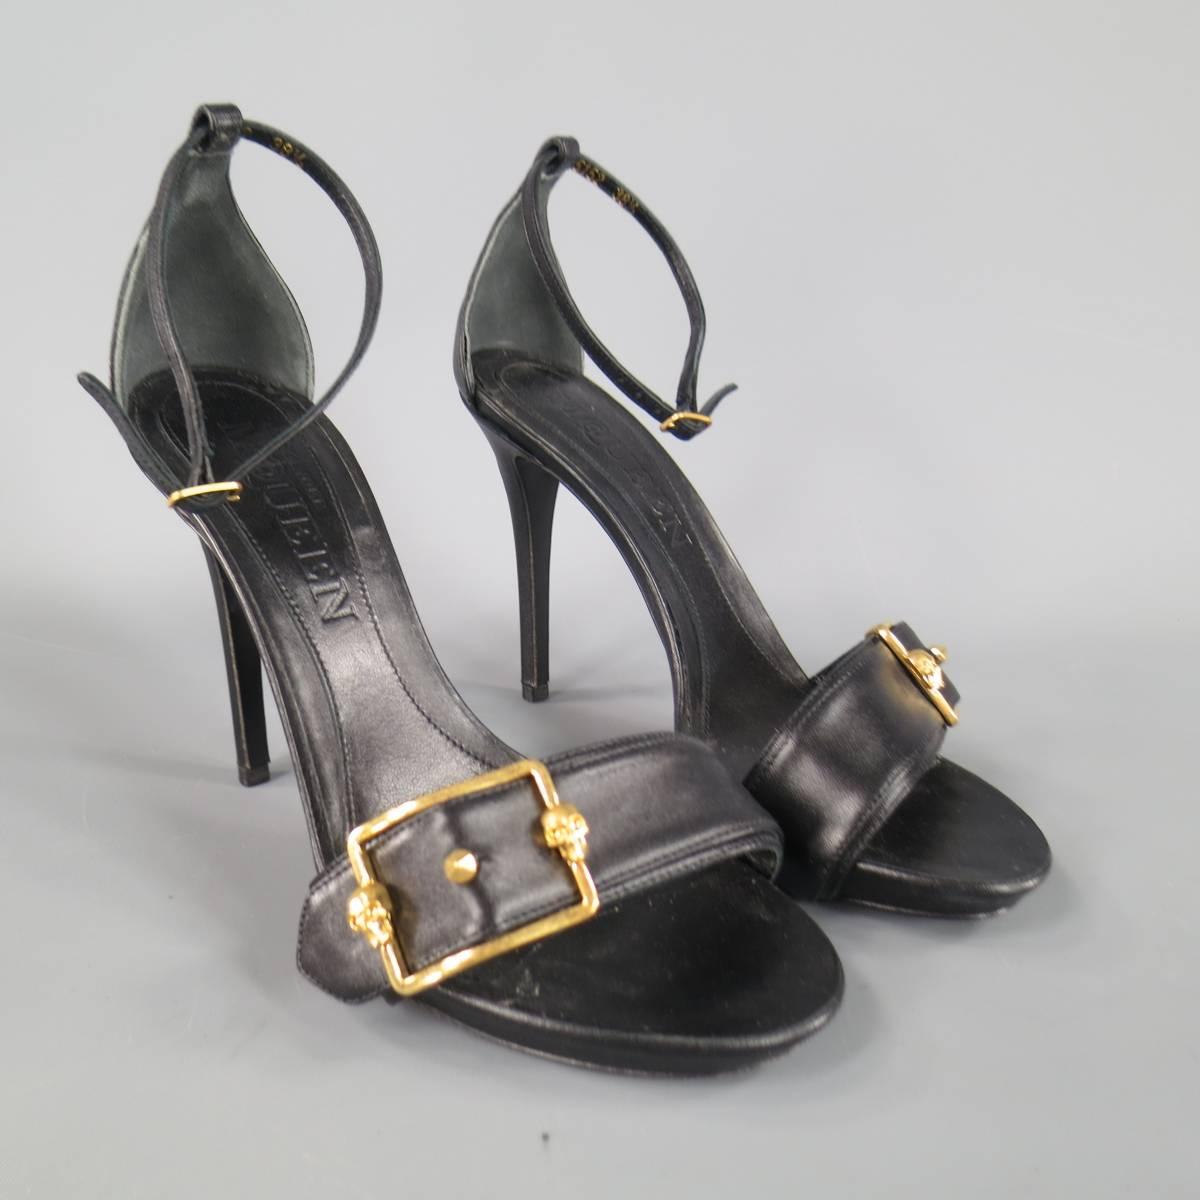 These fabulous ALEXANDER MCQUEEN sandals come in smooth black leather and feature a small platform, covered stiletto heel, skinny ankle strap, and thick belt toe strap with gold tone skull buckle. Made in Italy.
 
Excellent Pre-Owned